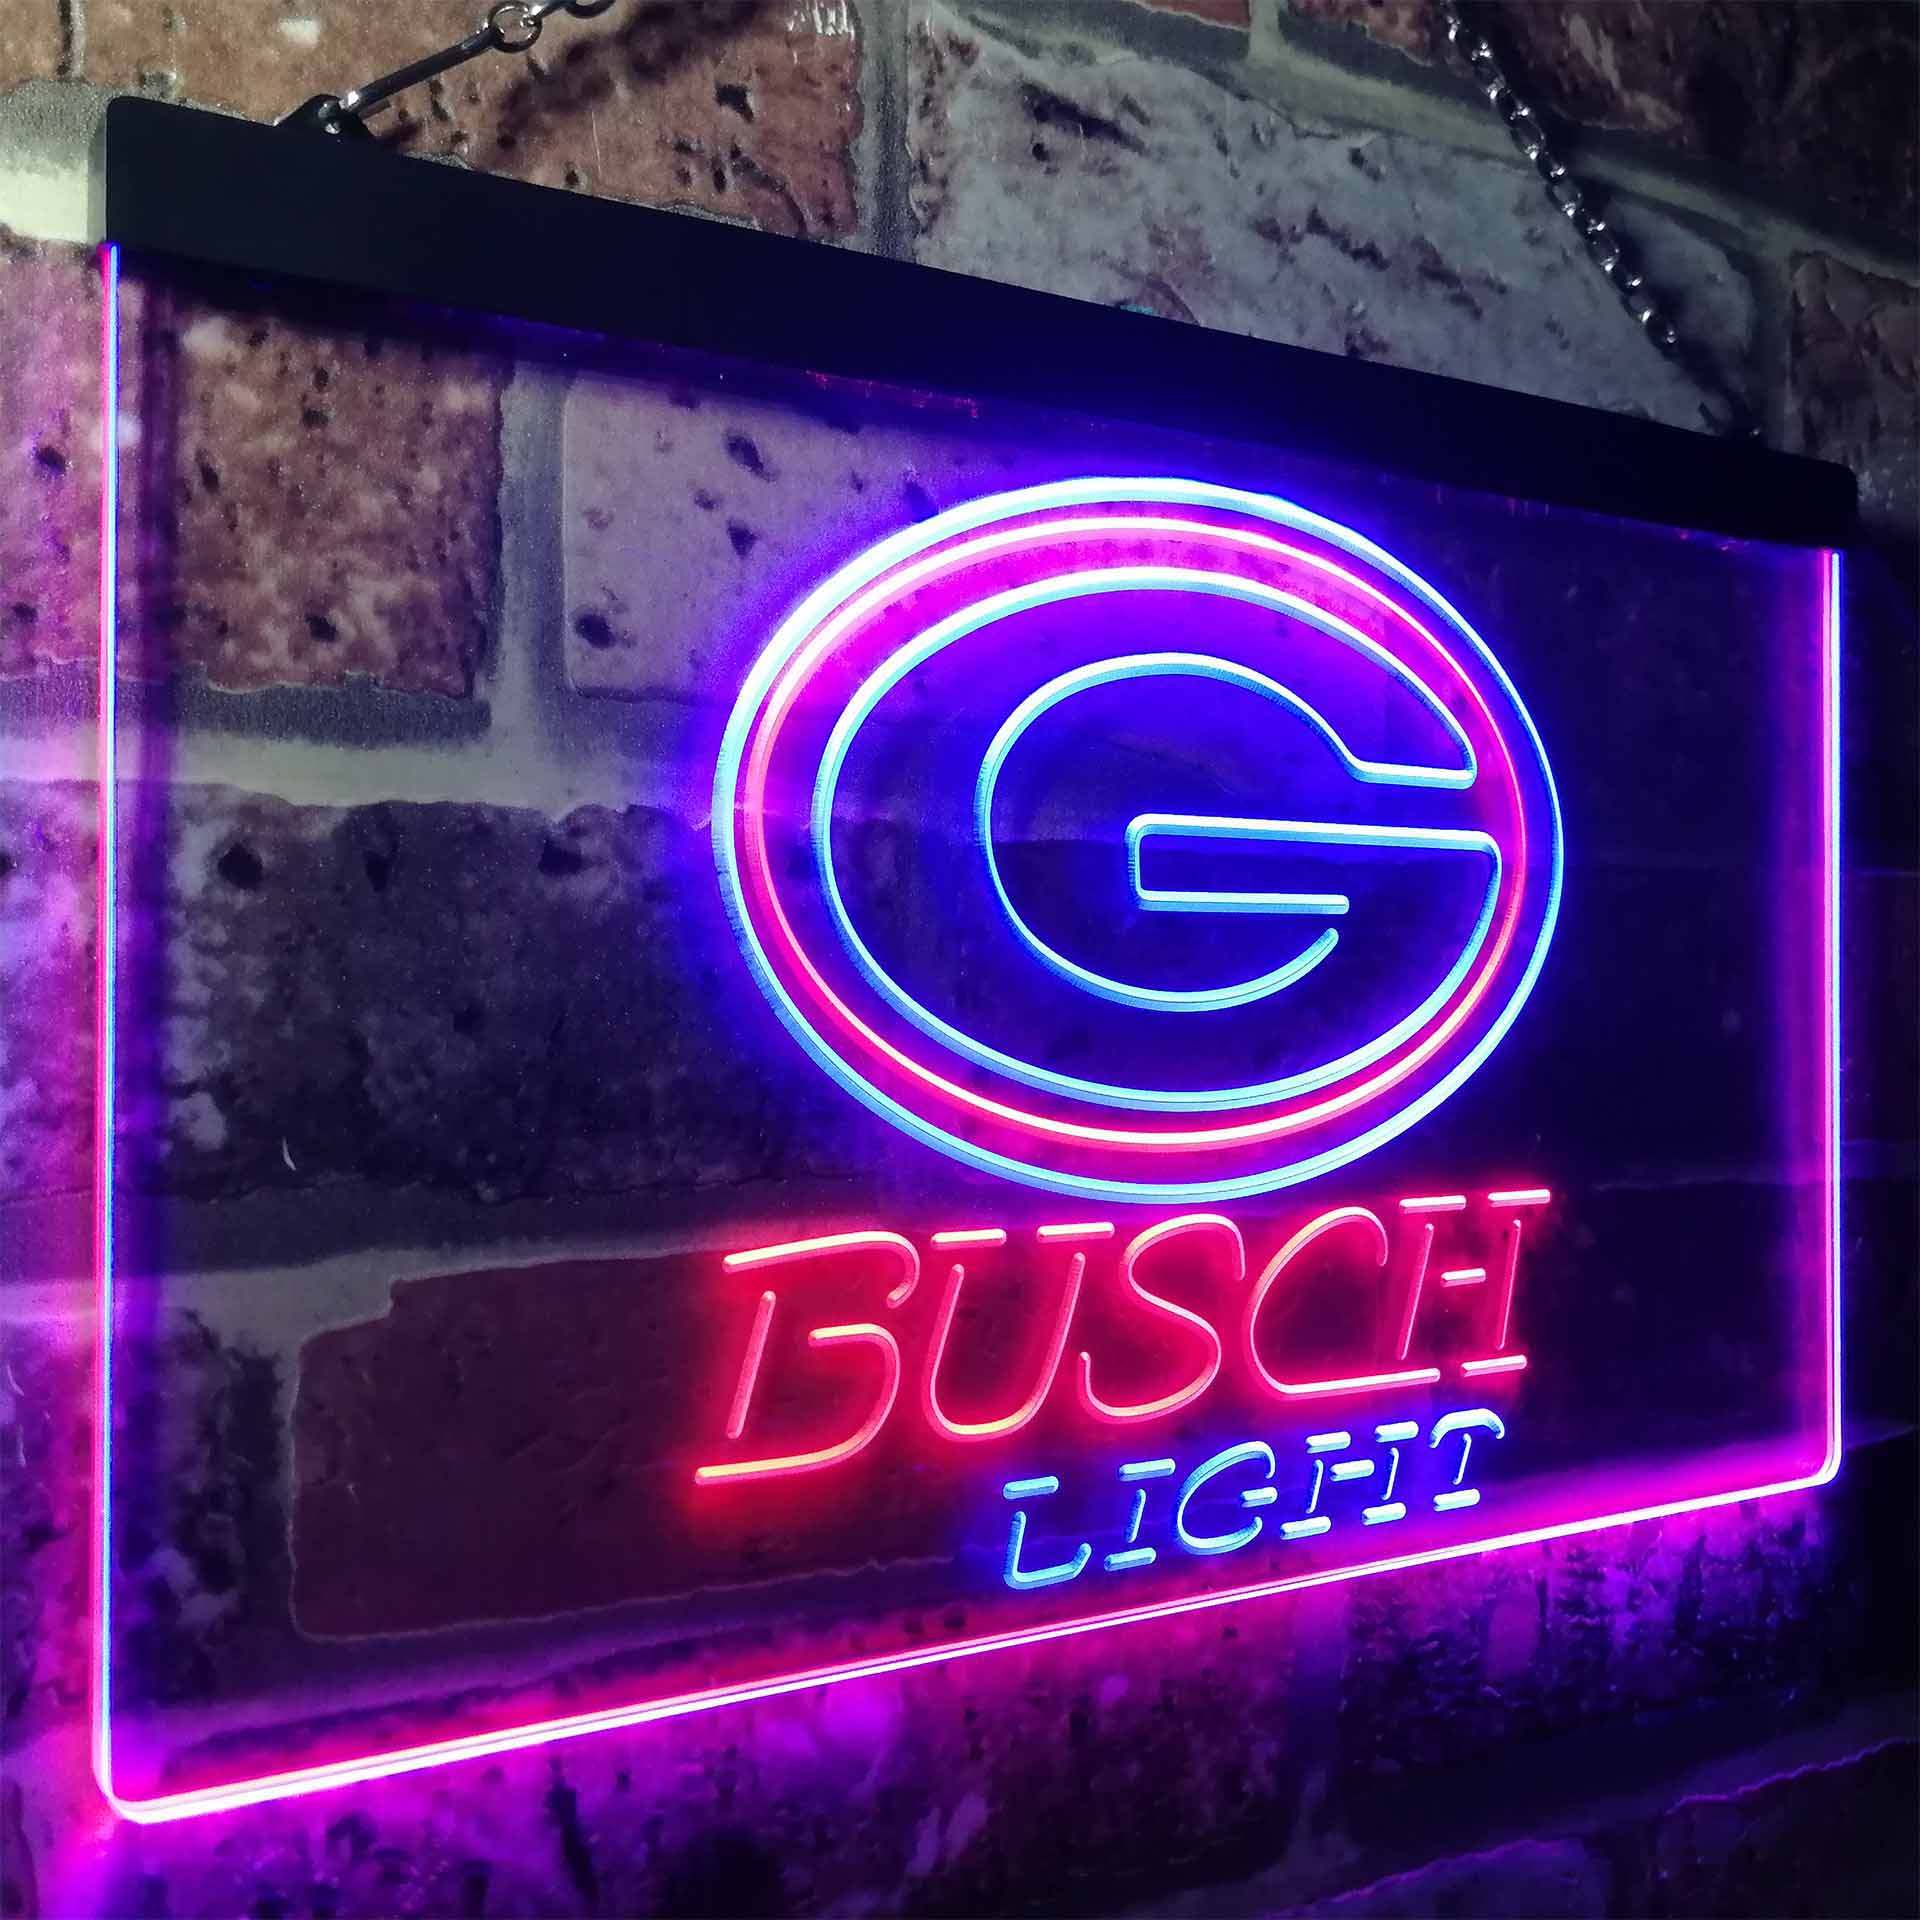 Green Bay Packers Busch Light Neon-Like LED Sign